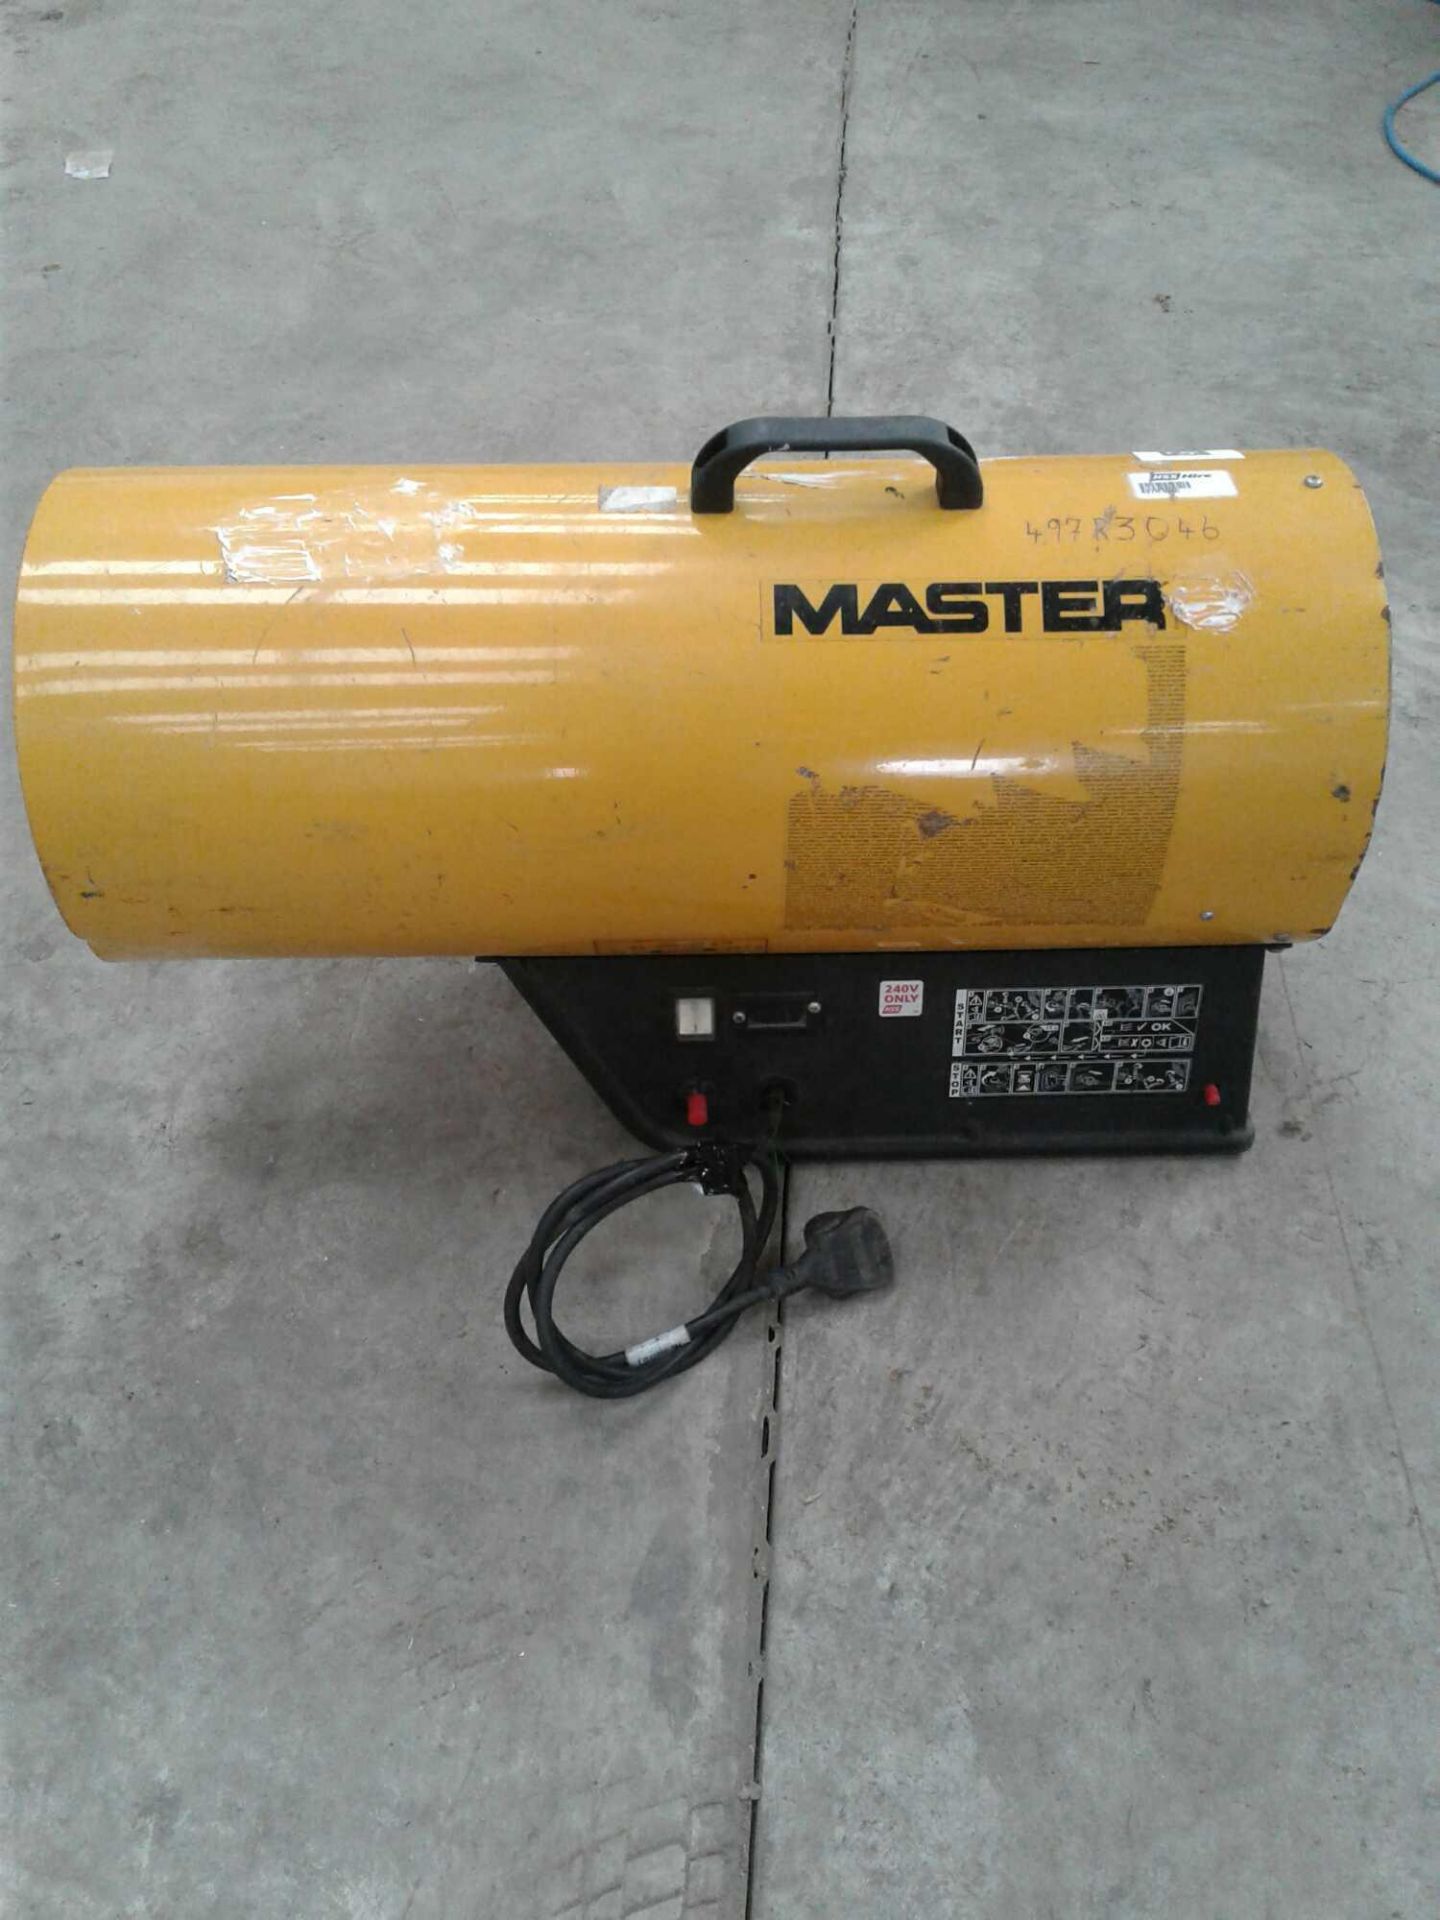 Master space heater 240 V - Image 2 of 2